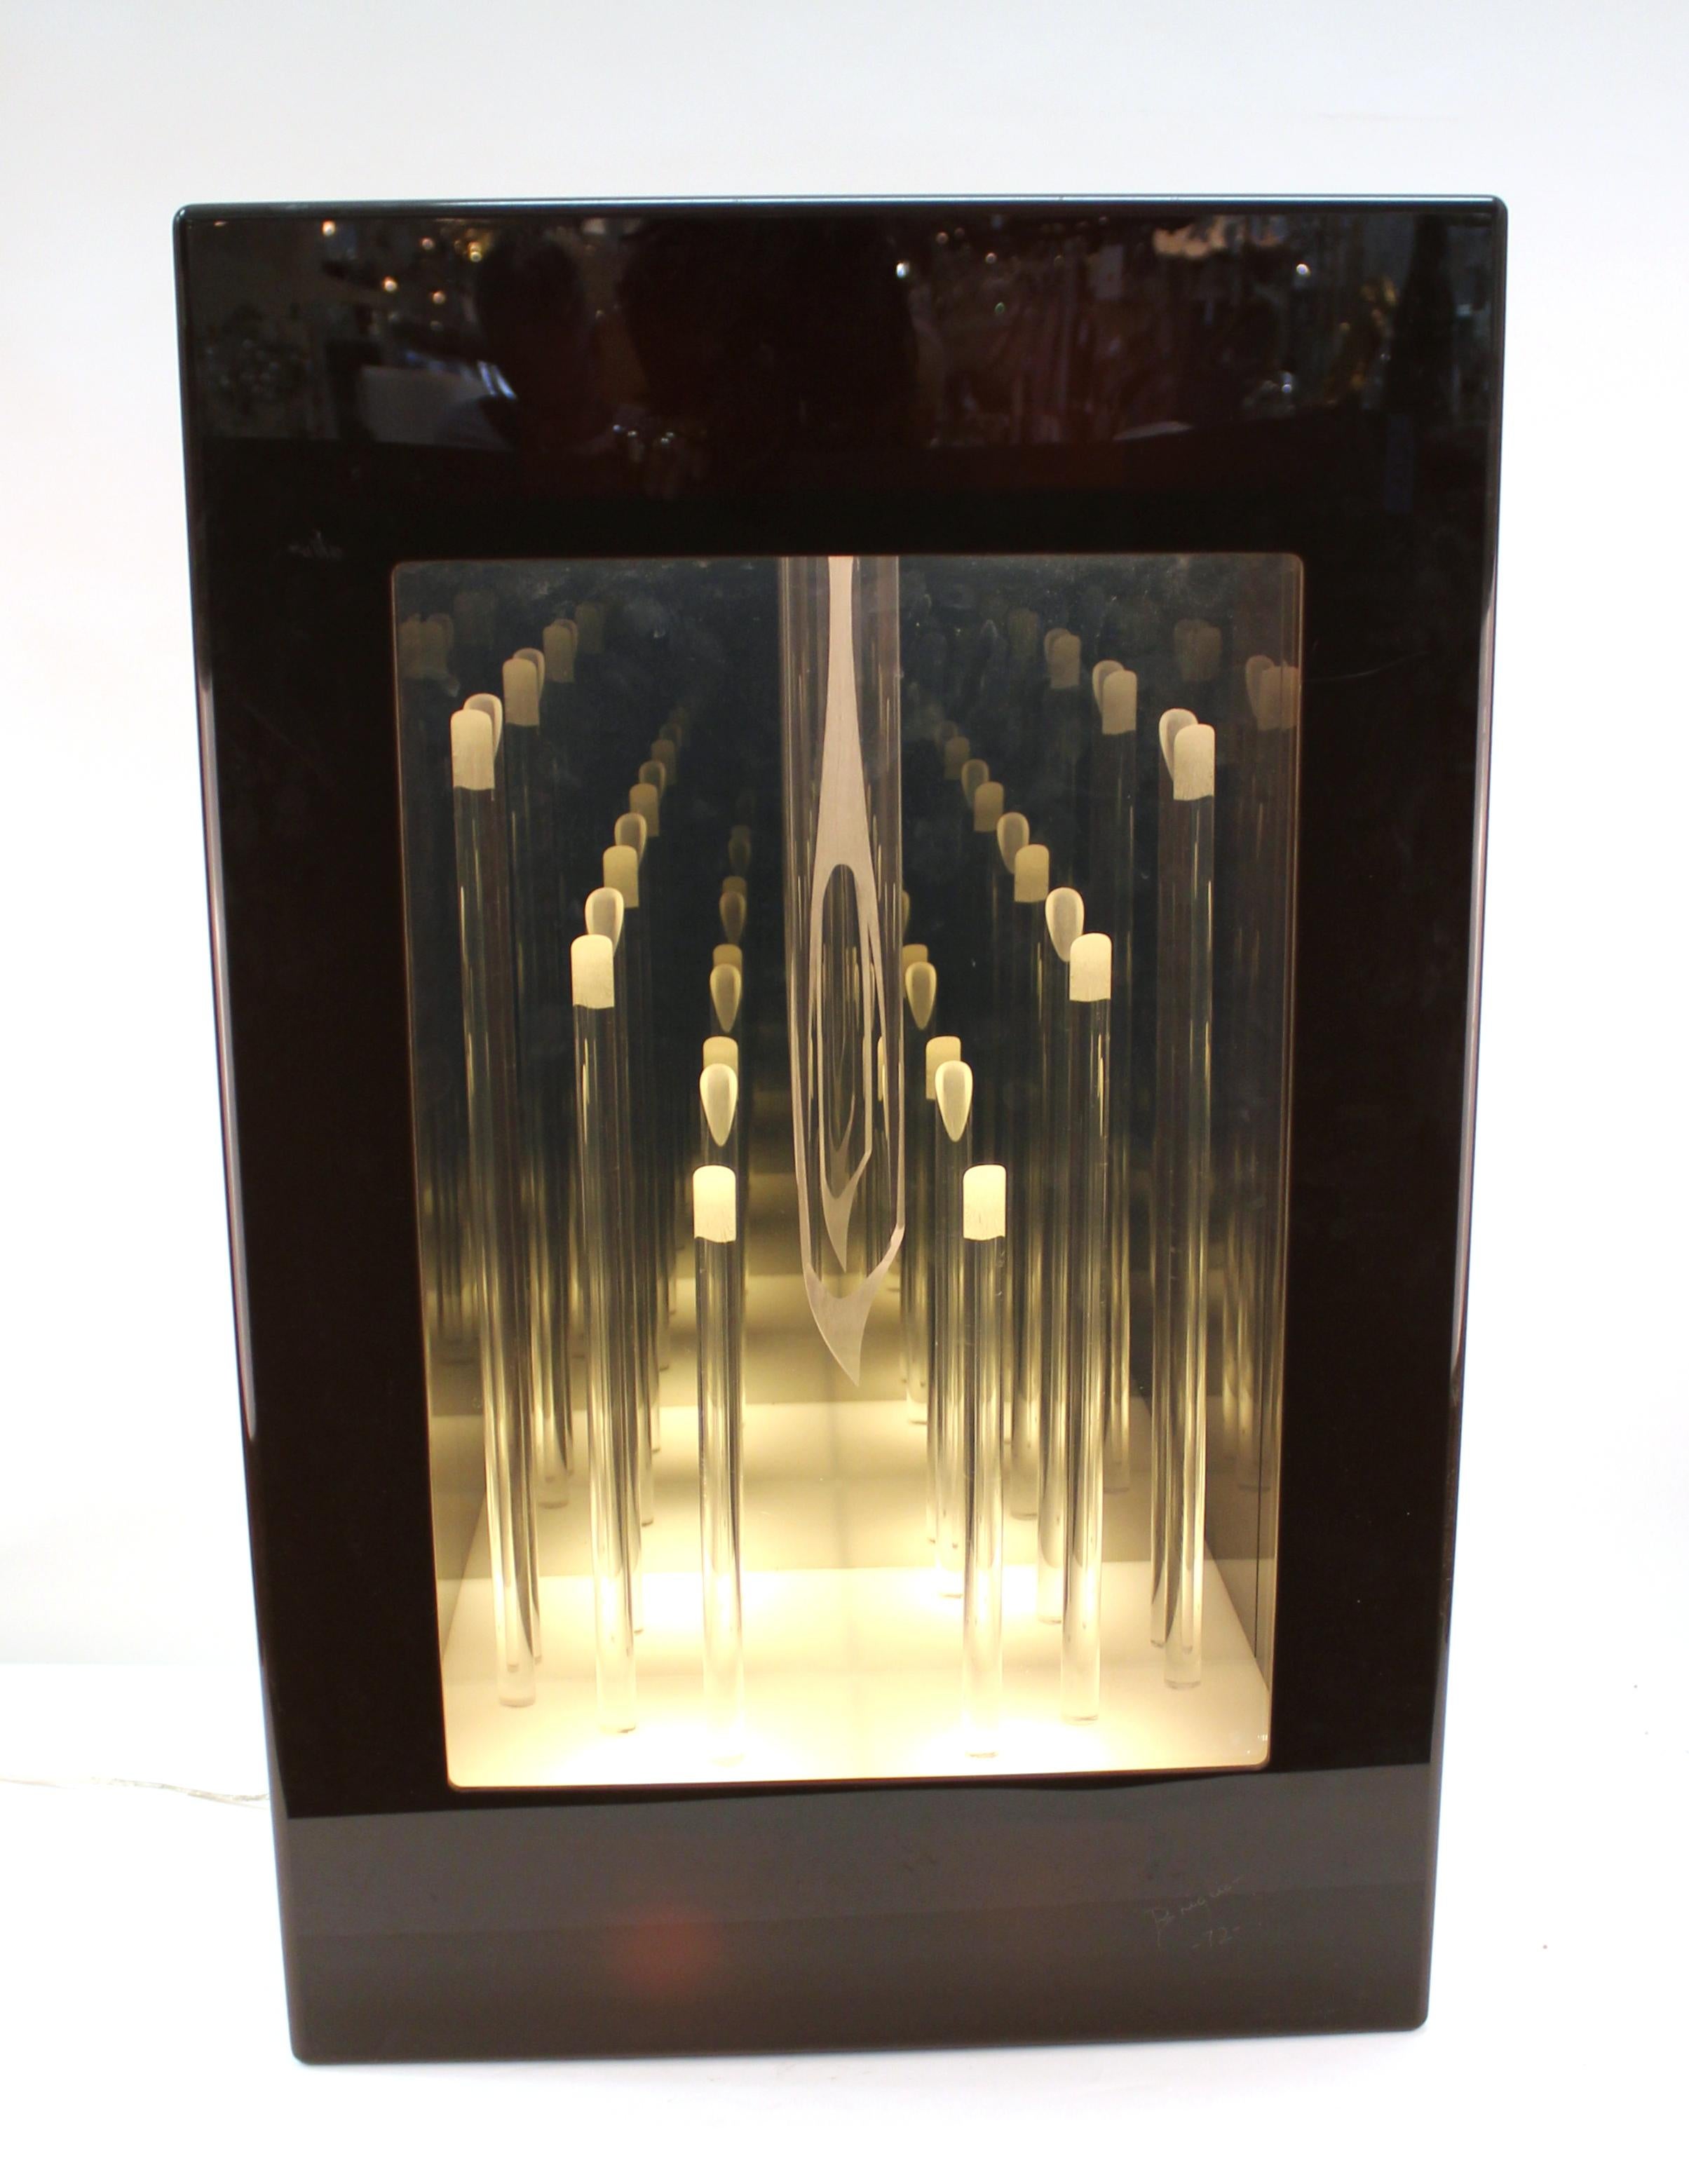 Modernist light box sculpture with interior depicting an abstract fireplace against an infinity mirror or candle-light when lit up. The piece is signed and dated 